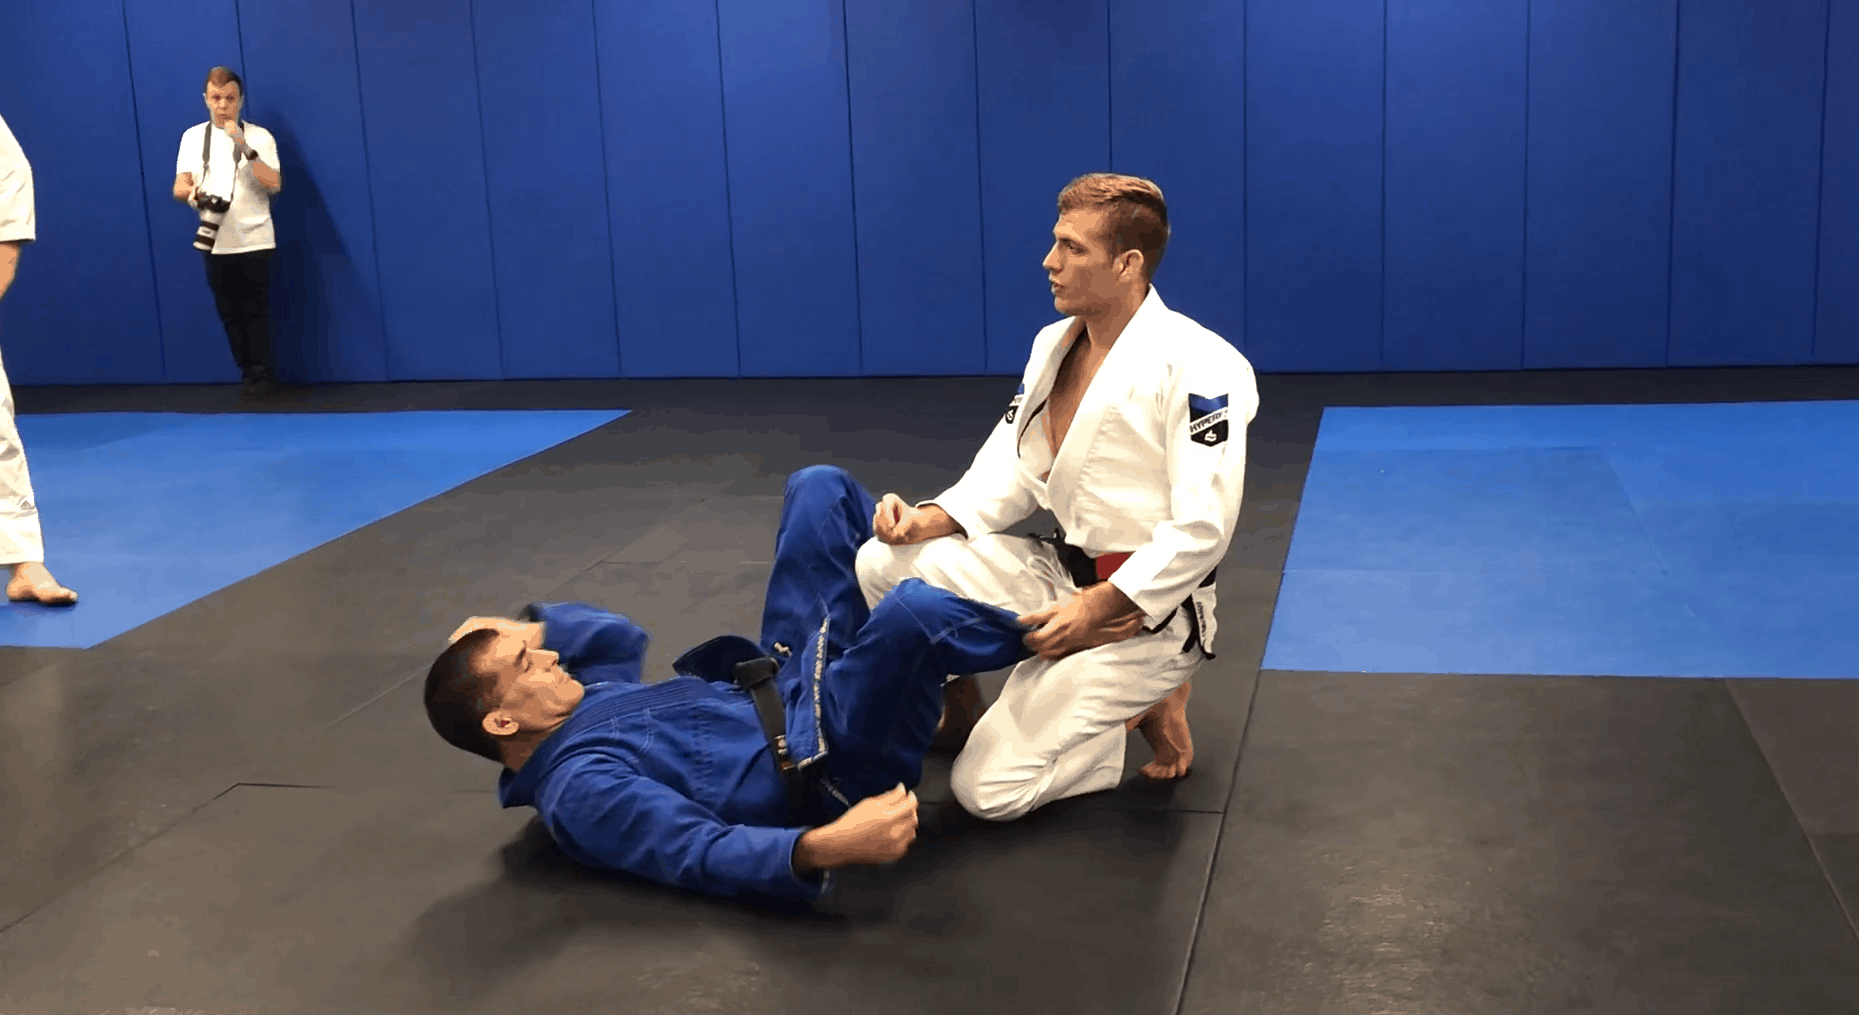 How To Engage Properly In Guard Passing - Keenan Online